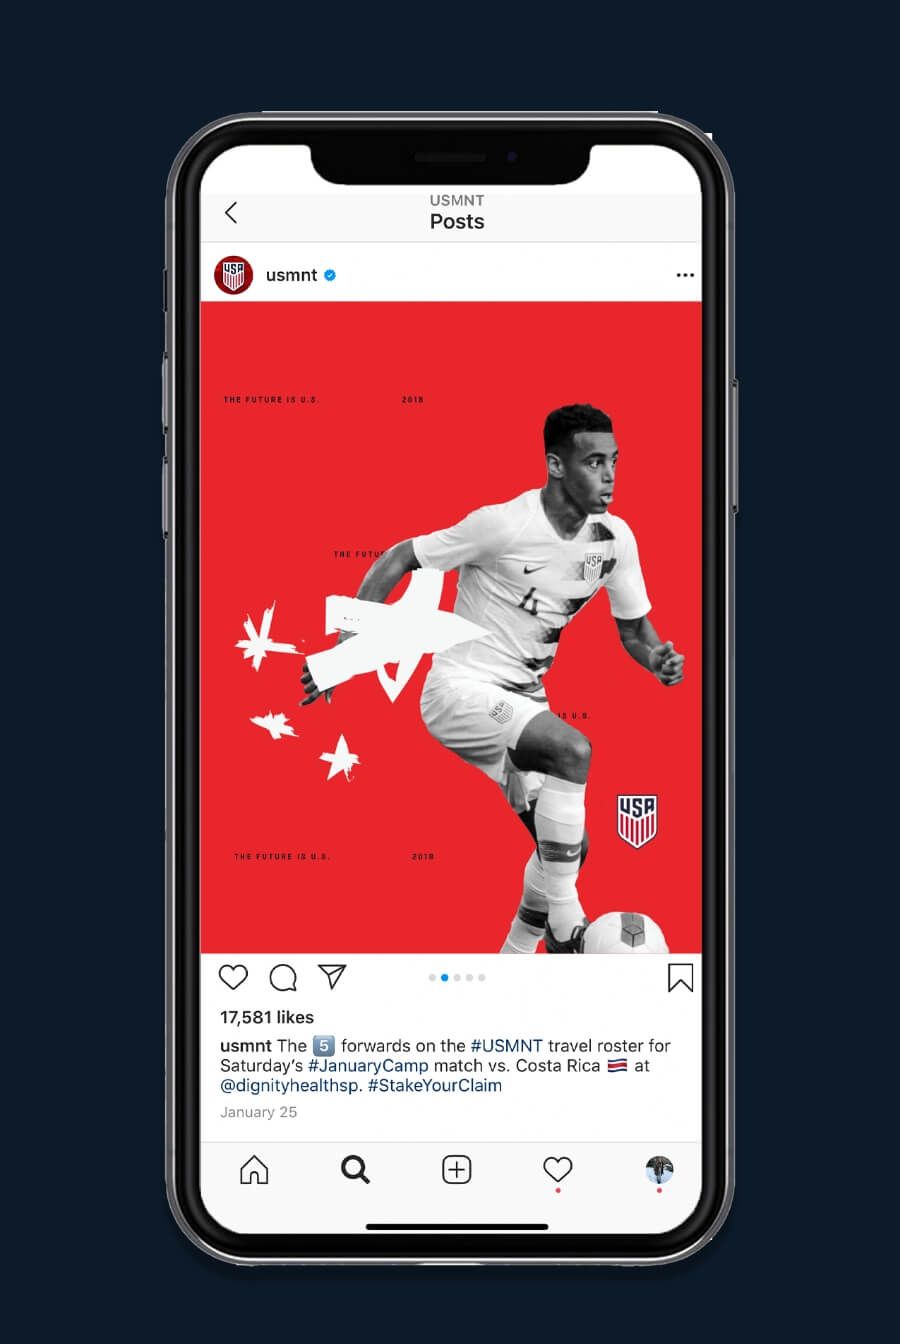 instagram post shown on phone from @usmnt shows us soccer player against red background. The Future is U.S. 2018